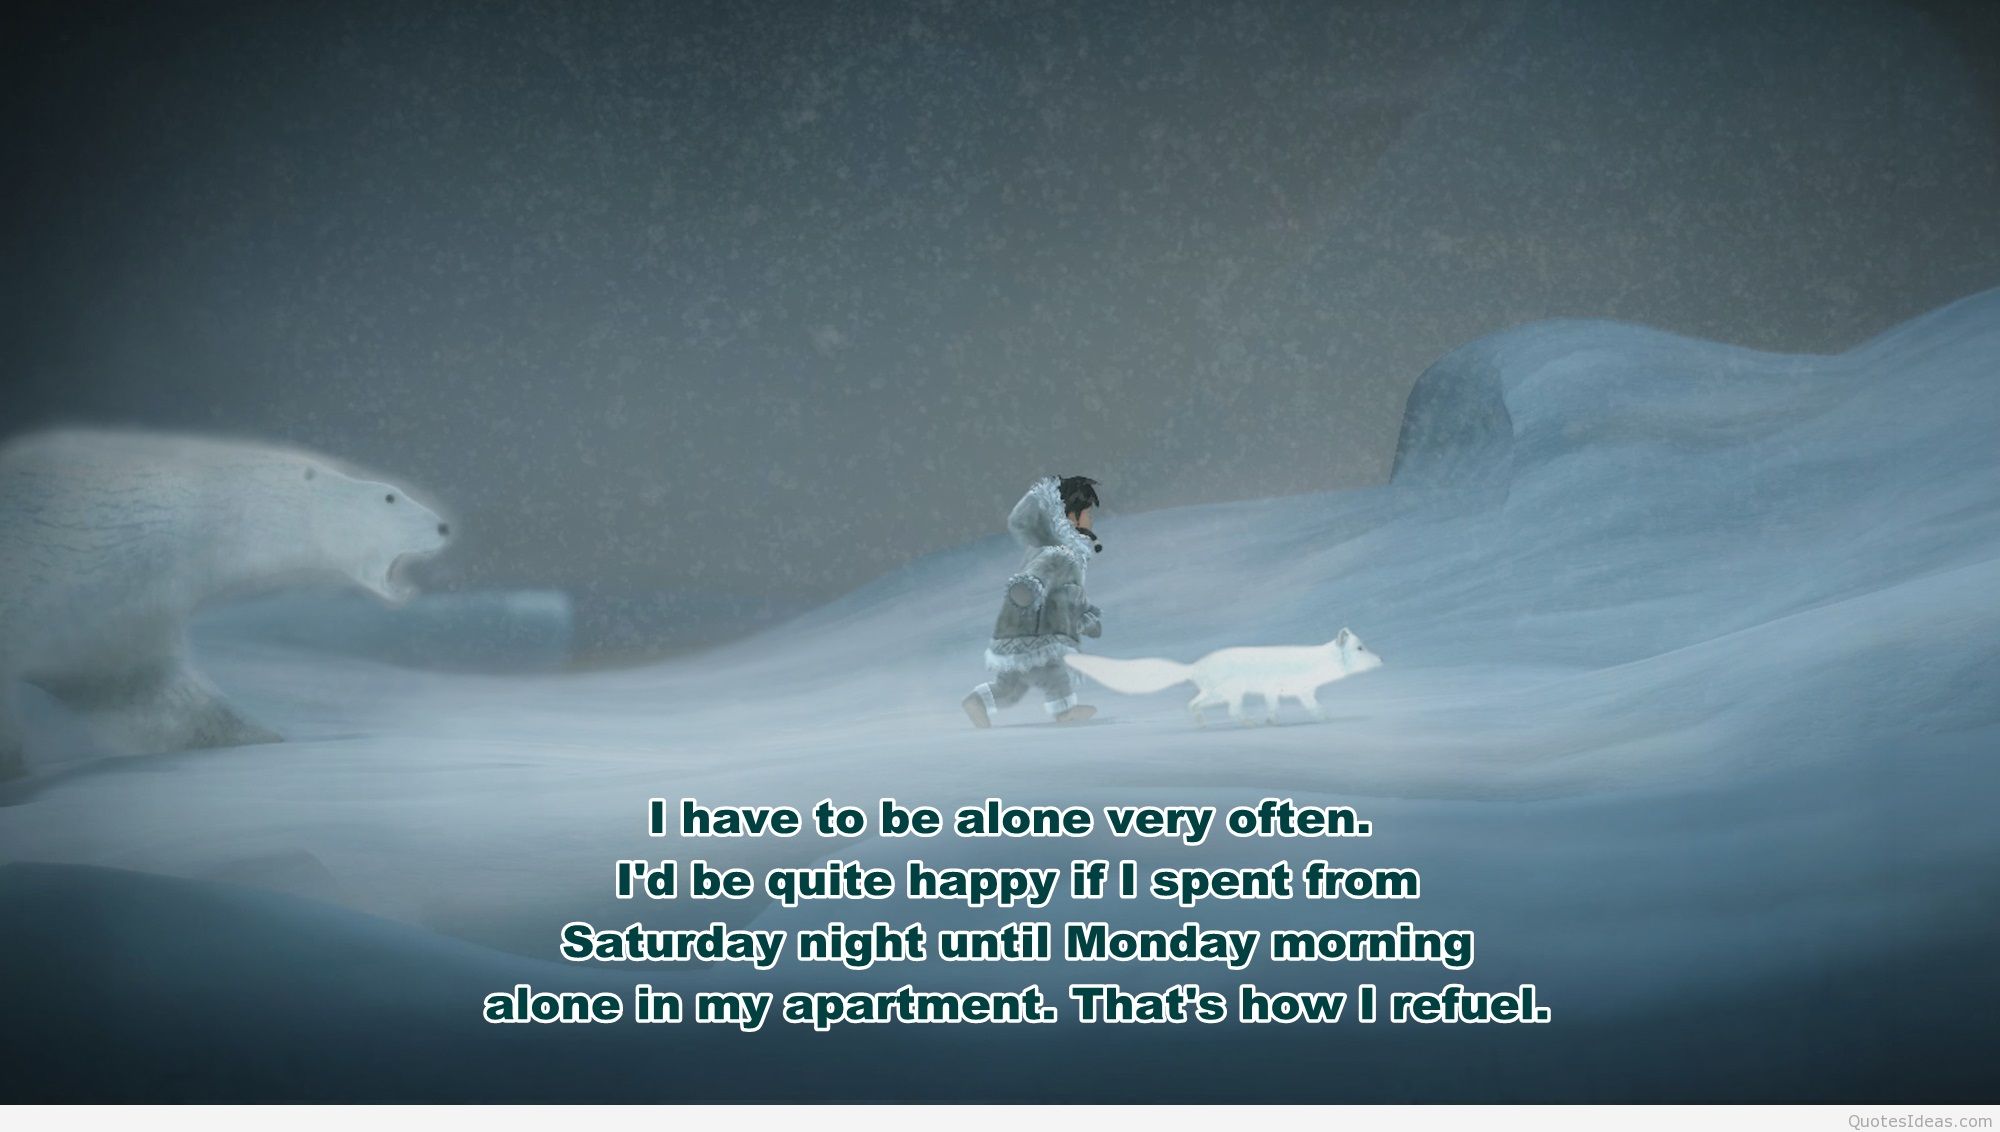 Awesome Hd Alone Quote - Snow - HD Wallpaper 